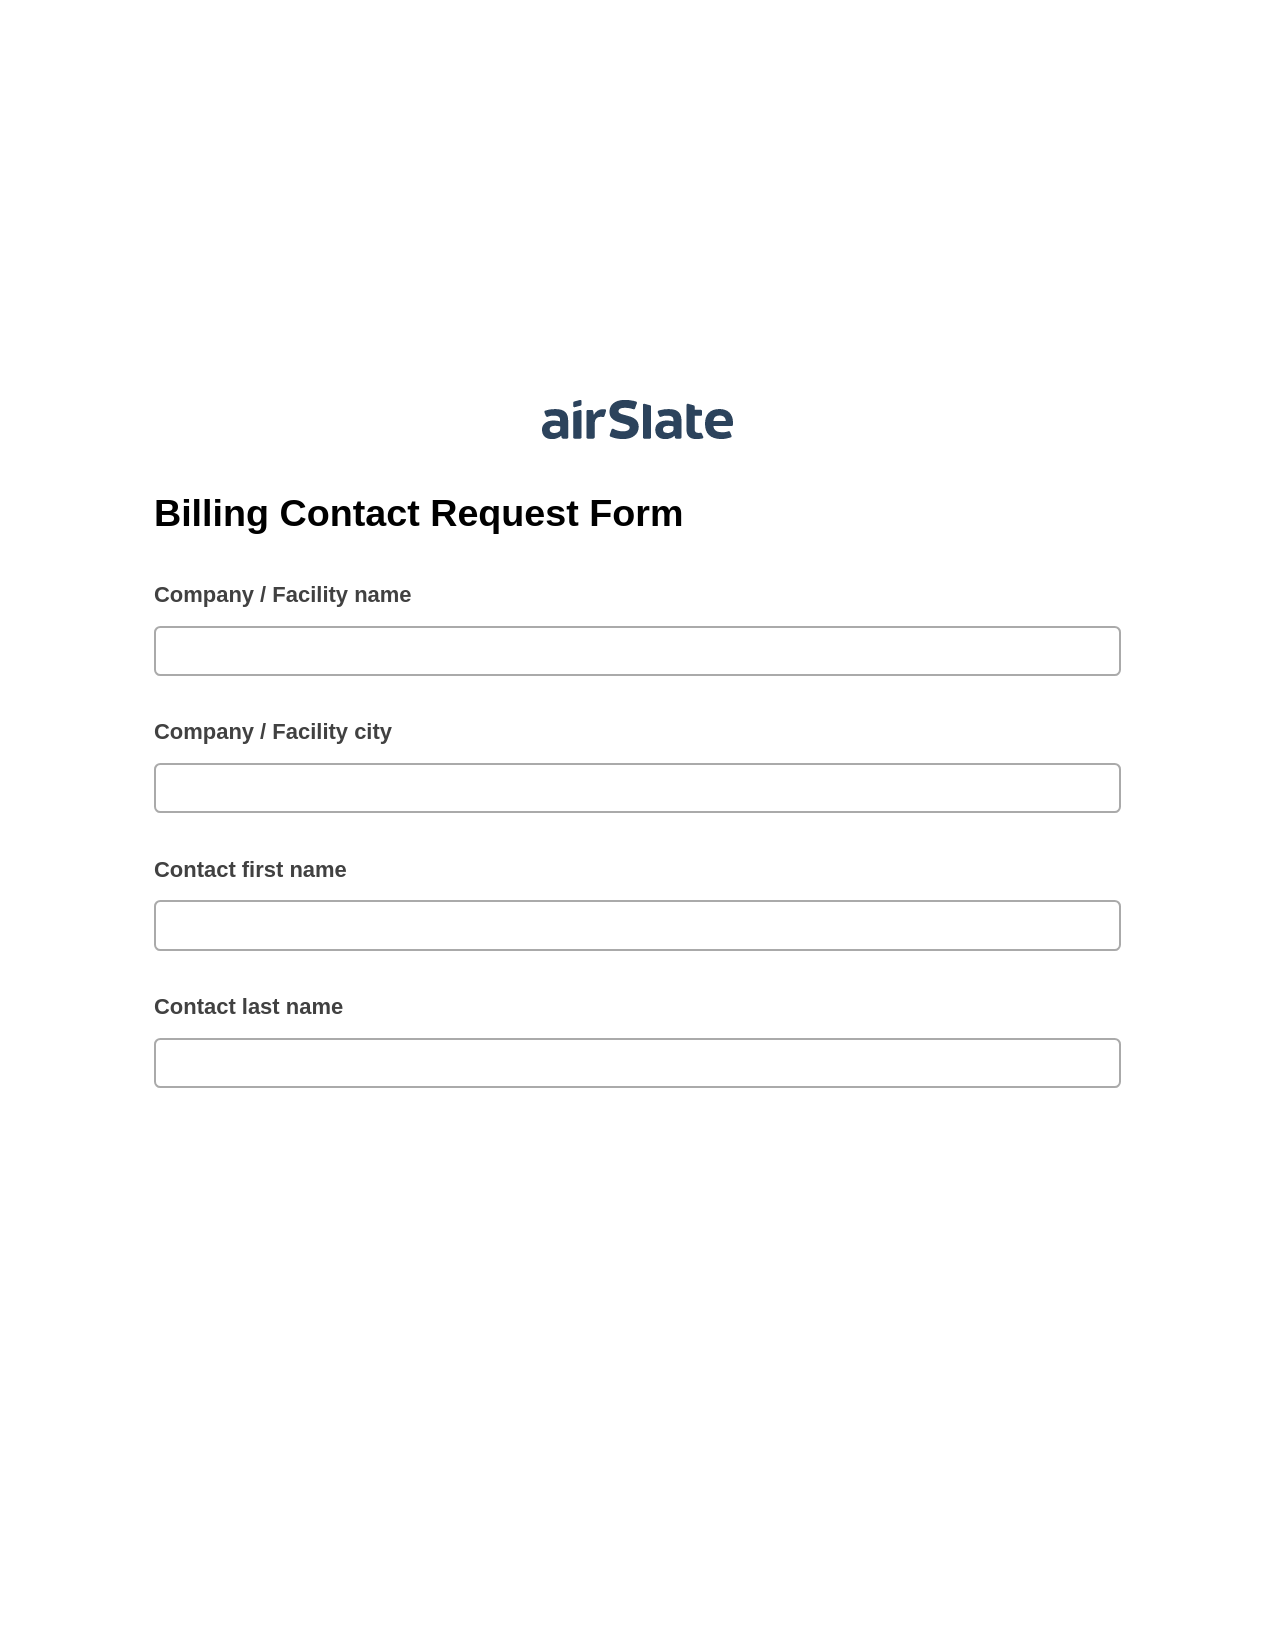 Billing Contact Request Form Pre-fill Dropdown from Airtable, Create slate bot, Archive to SharePoint Folder Bot